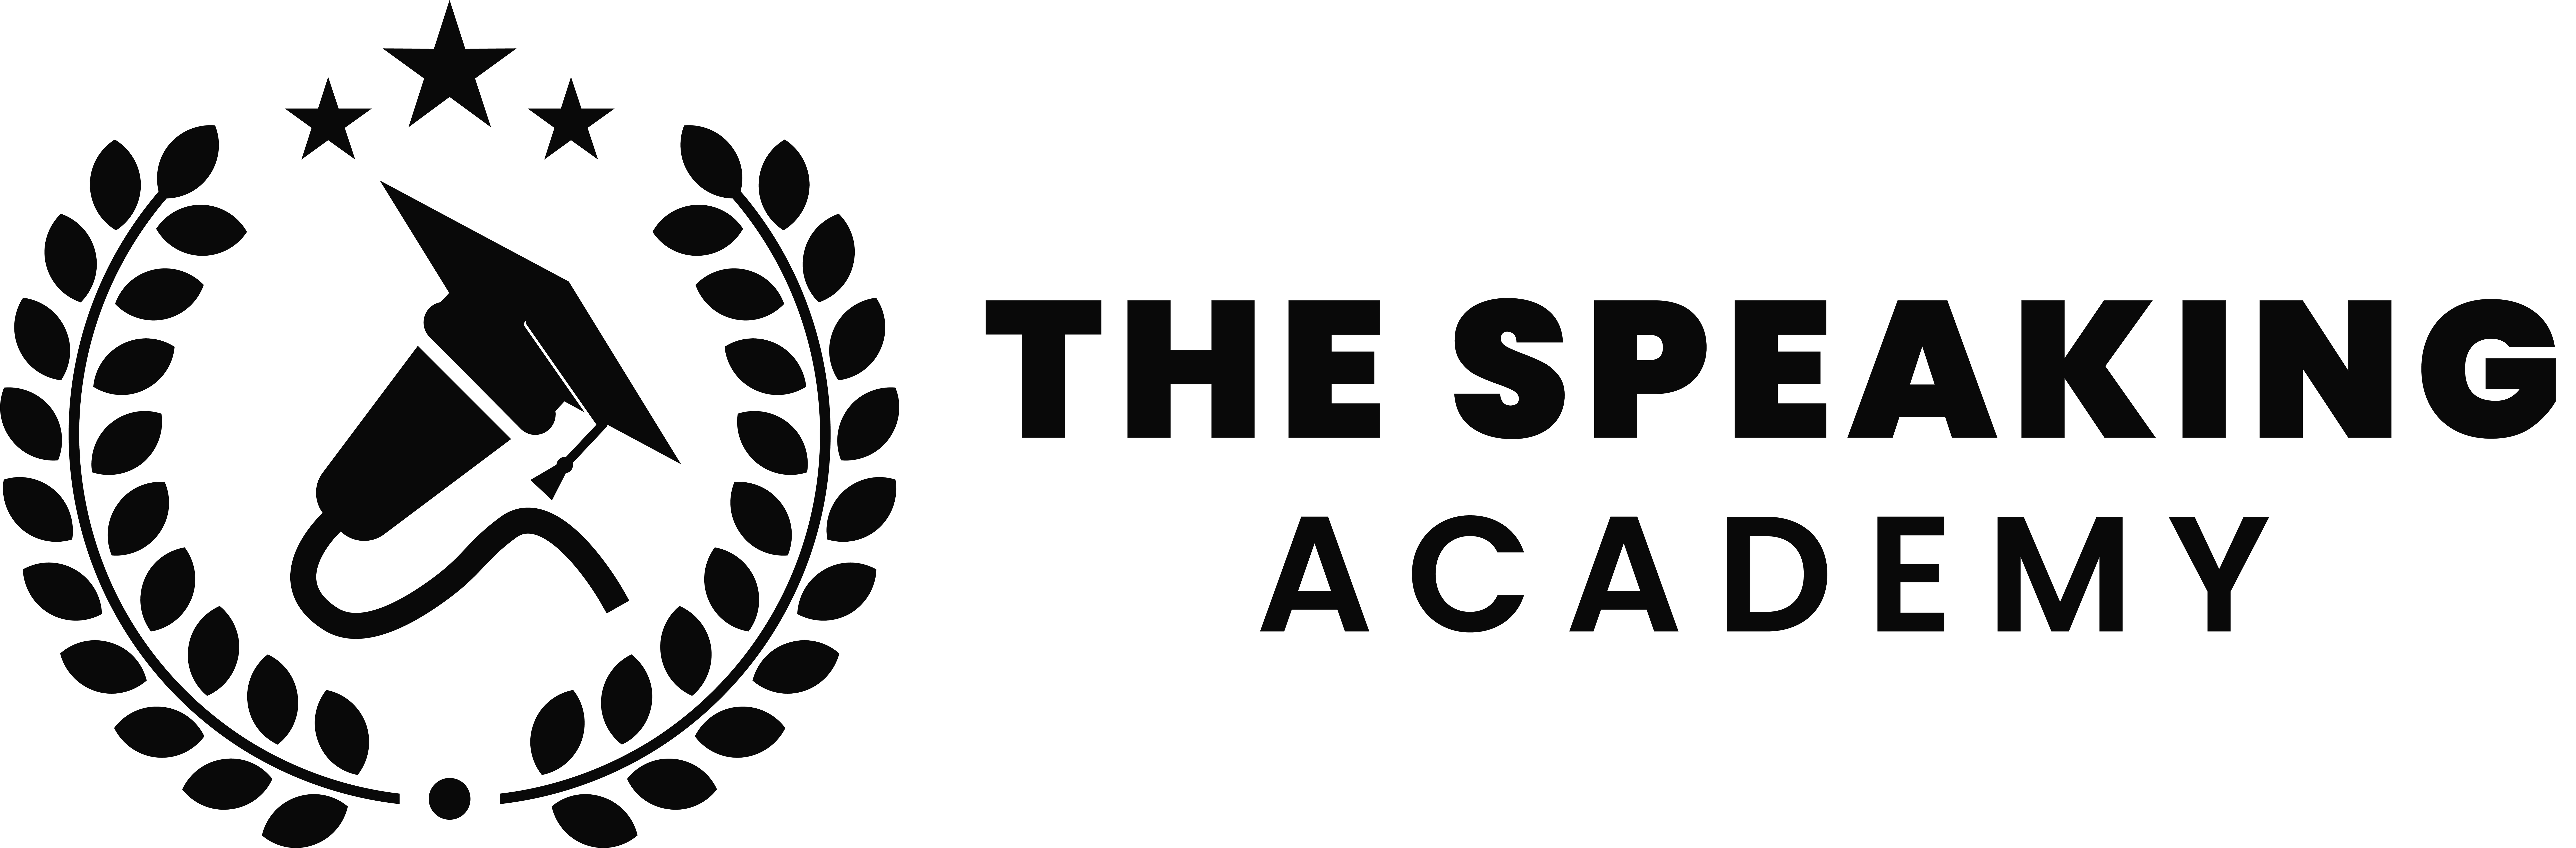 The Speaking Academy